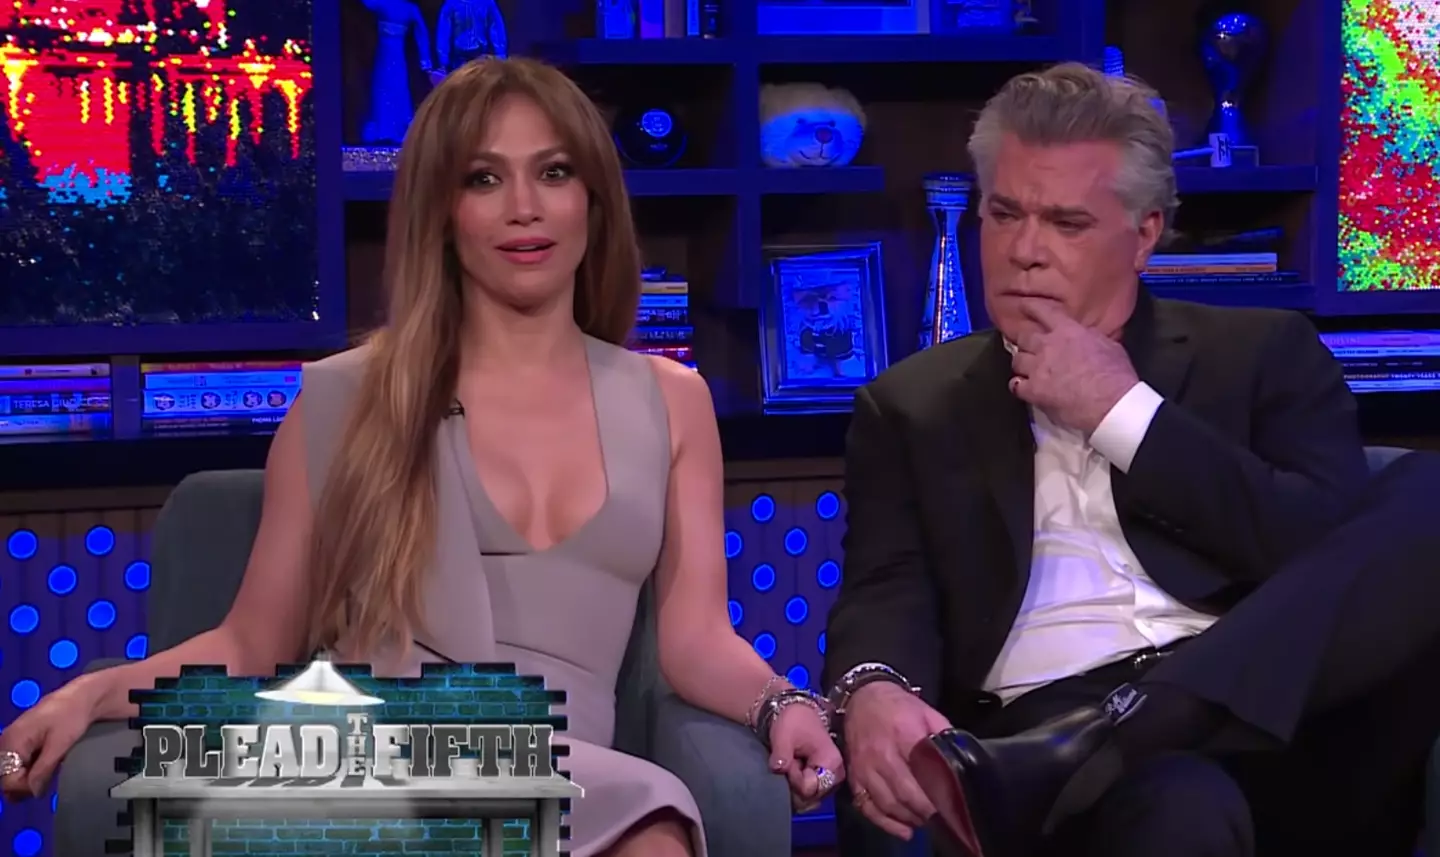 Some of his answers shocked J-Lo.